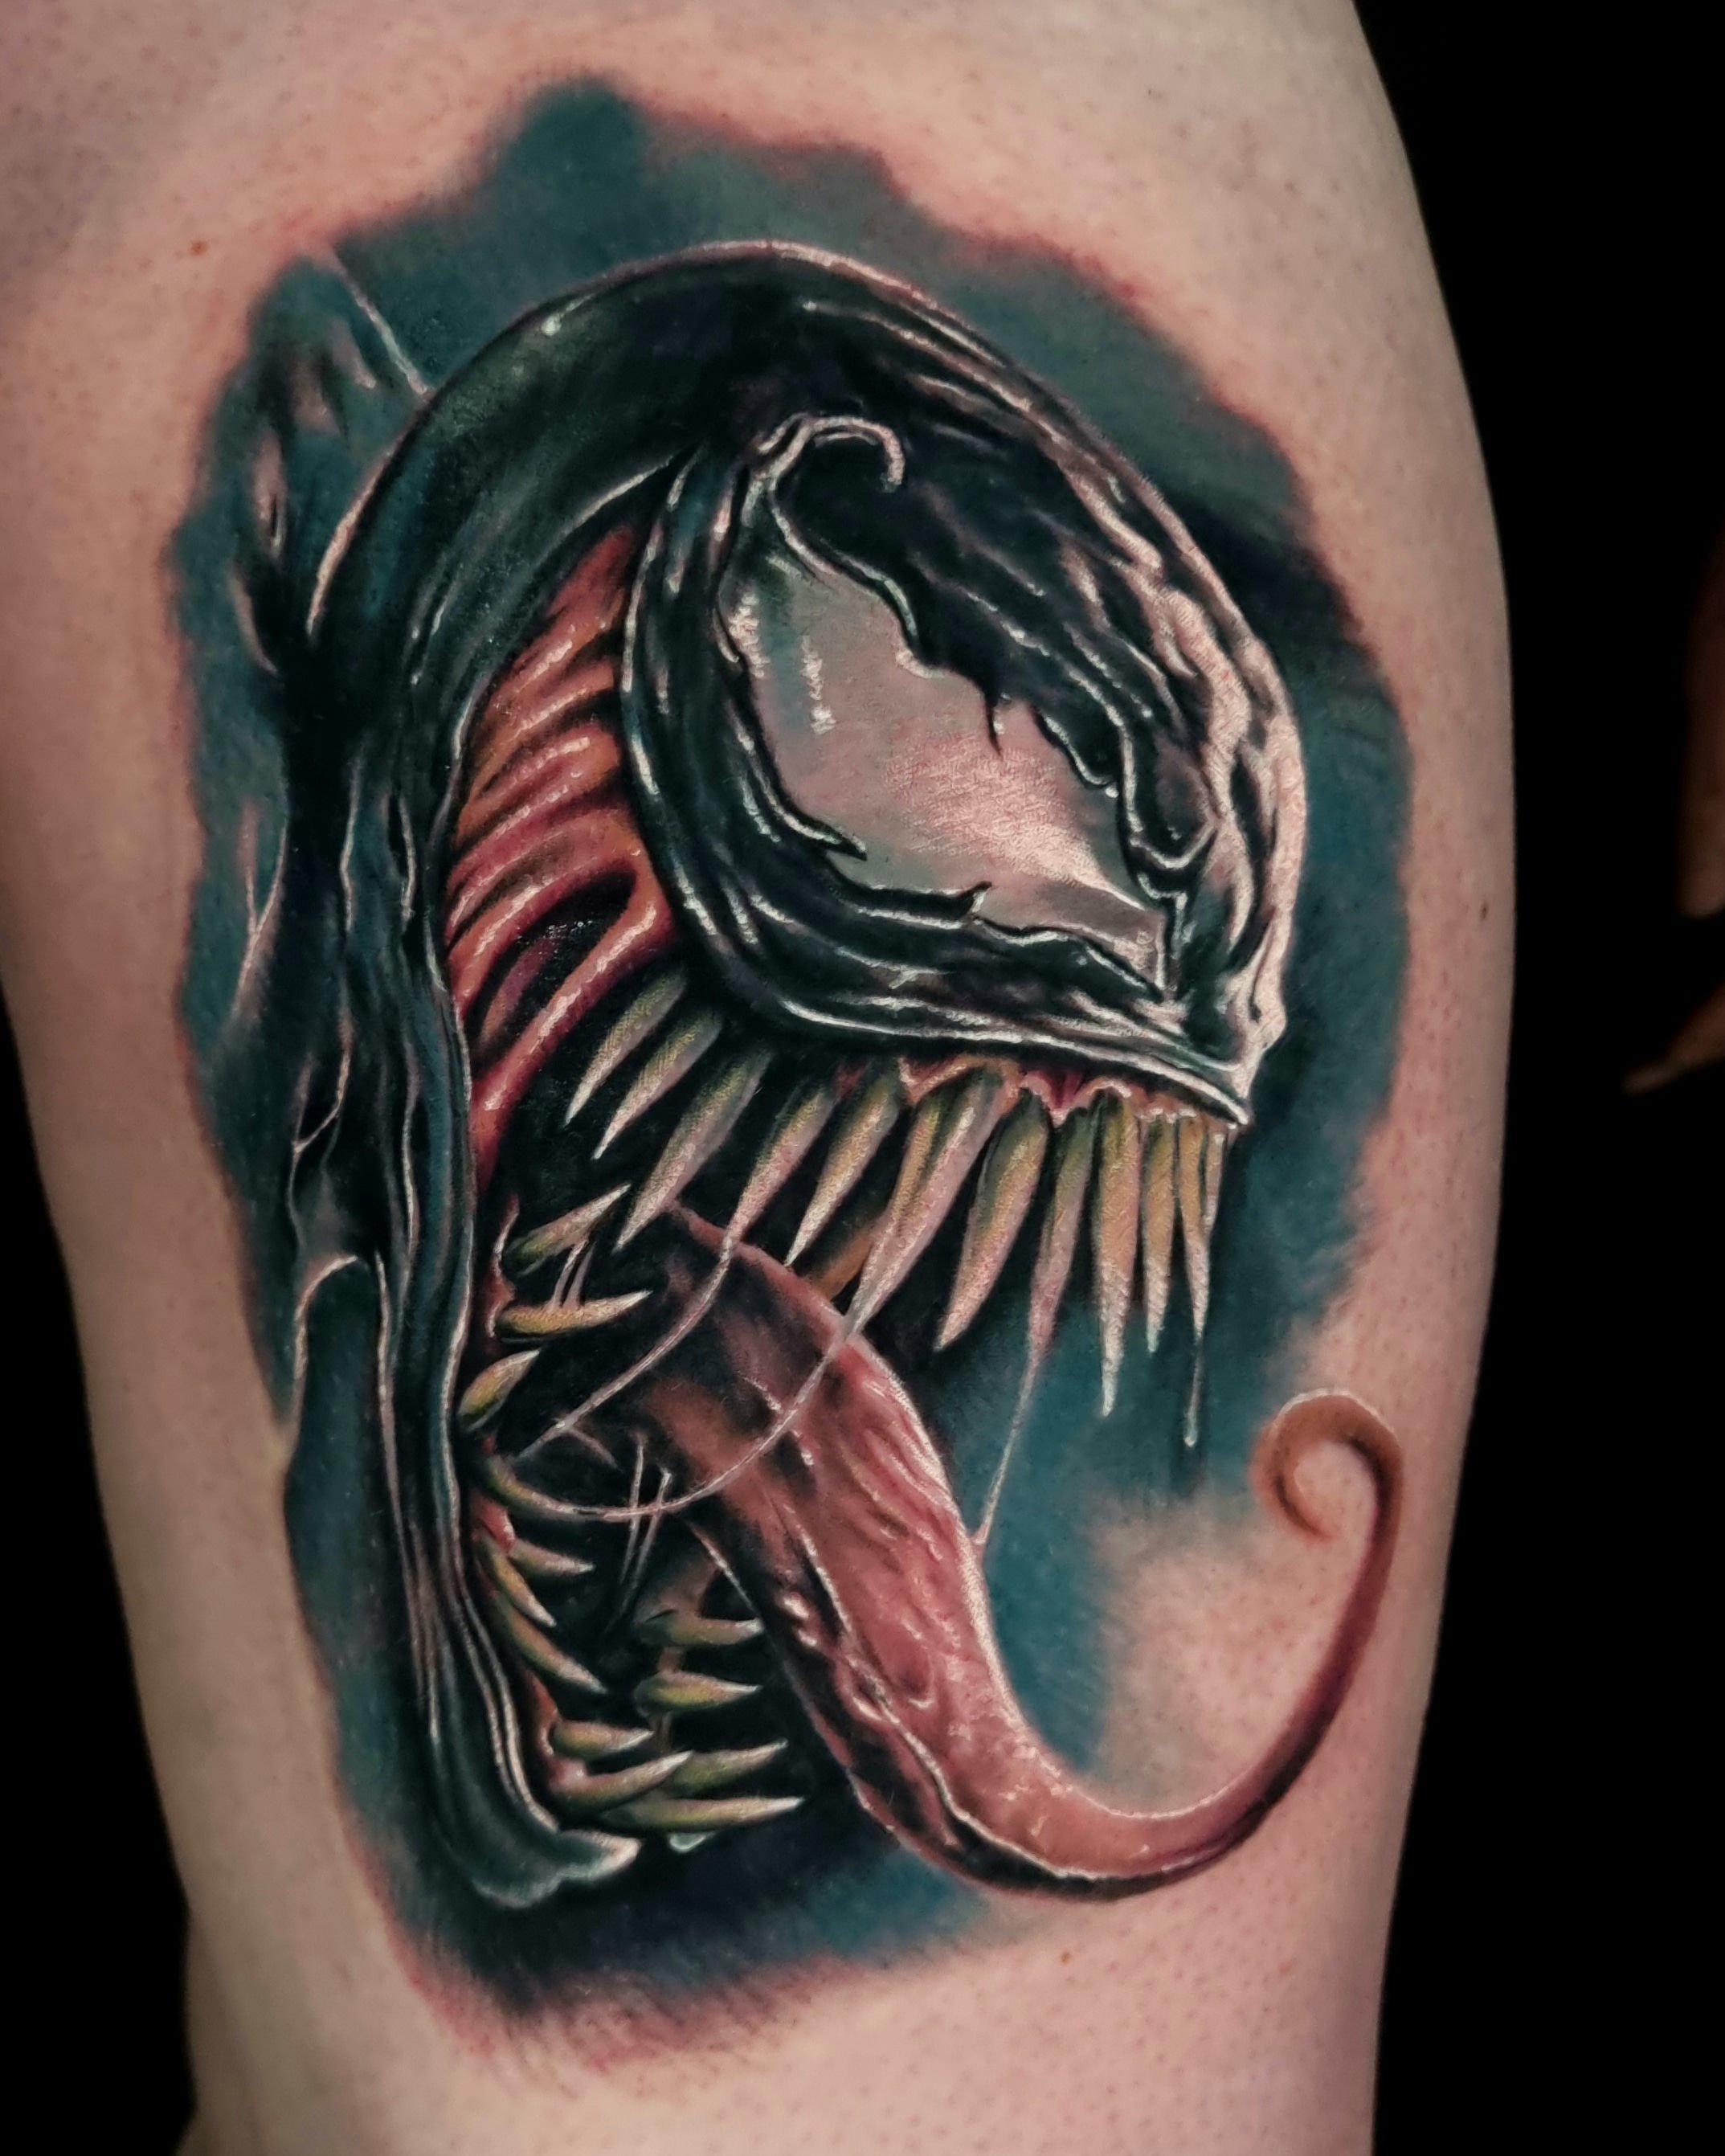 Venom tattoo done by... - Lucky Gal Tattoo and Piercing | Facebook